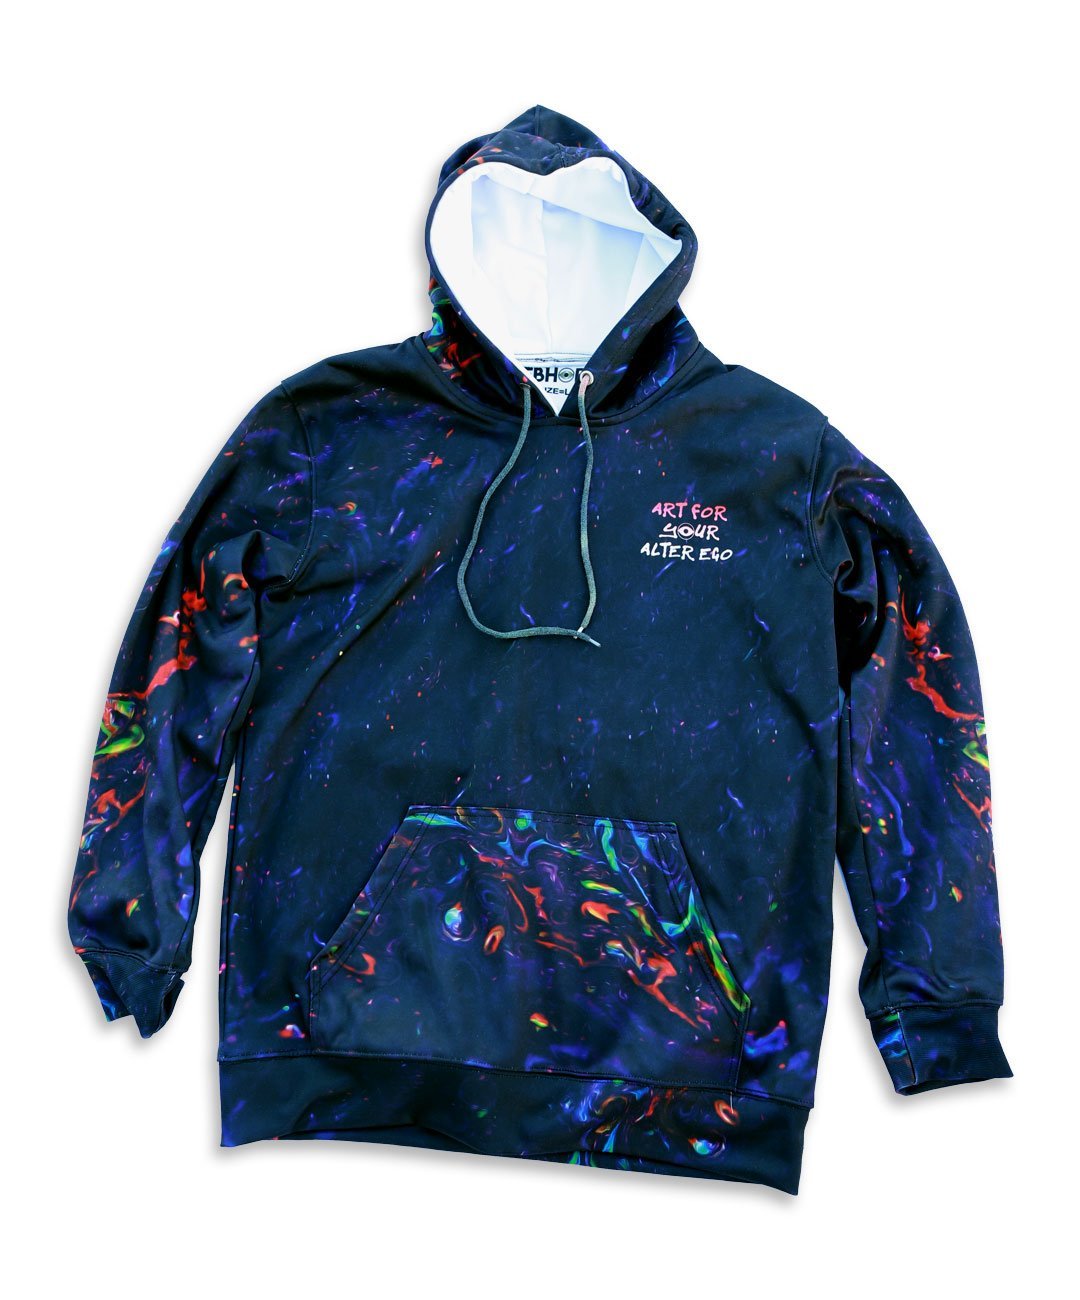 Don't Let Your Dreams Fade Away Unisex Tie-Dye Pull-Over Hoodies - REBHORN DESIGN